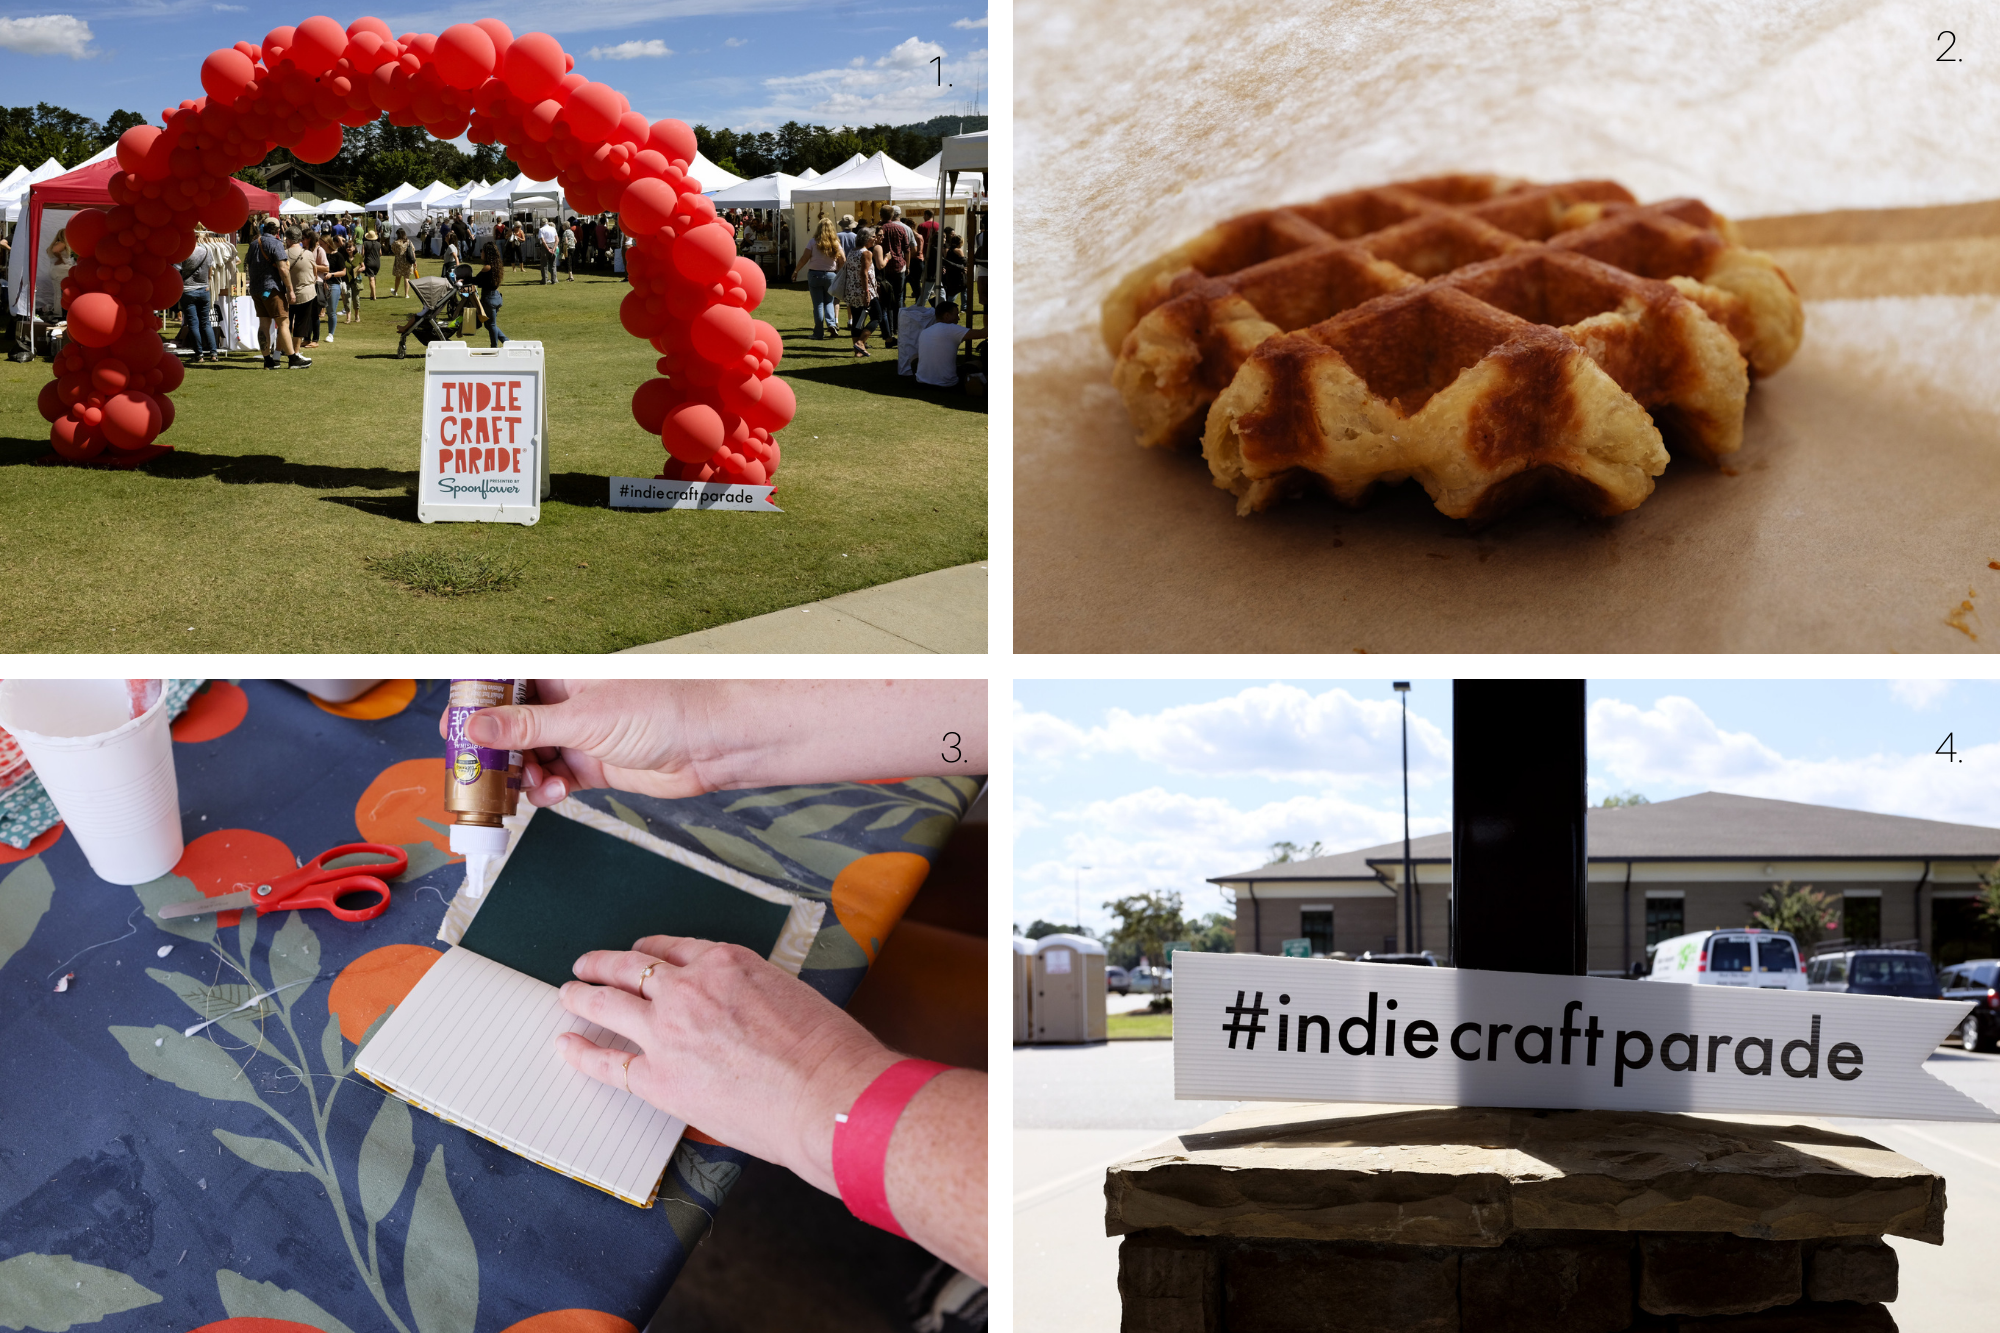 Image collage, clockwise from top left: a red balloon arch and a sandwich board that reads "Indie Craft Parade" in front of the festival, a waffle in a brown paper wrapper, a cardboard banner that reads #indiecraftparade, and a crafting station with fabric-covered notebooks